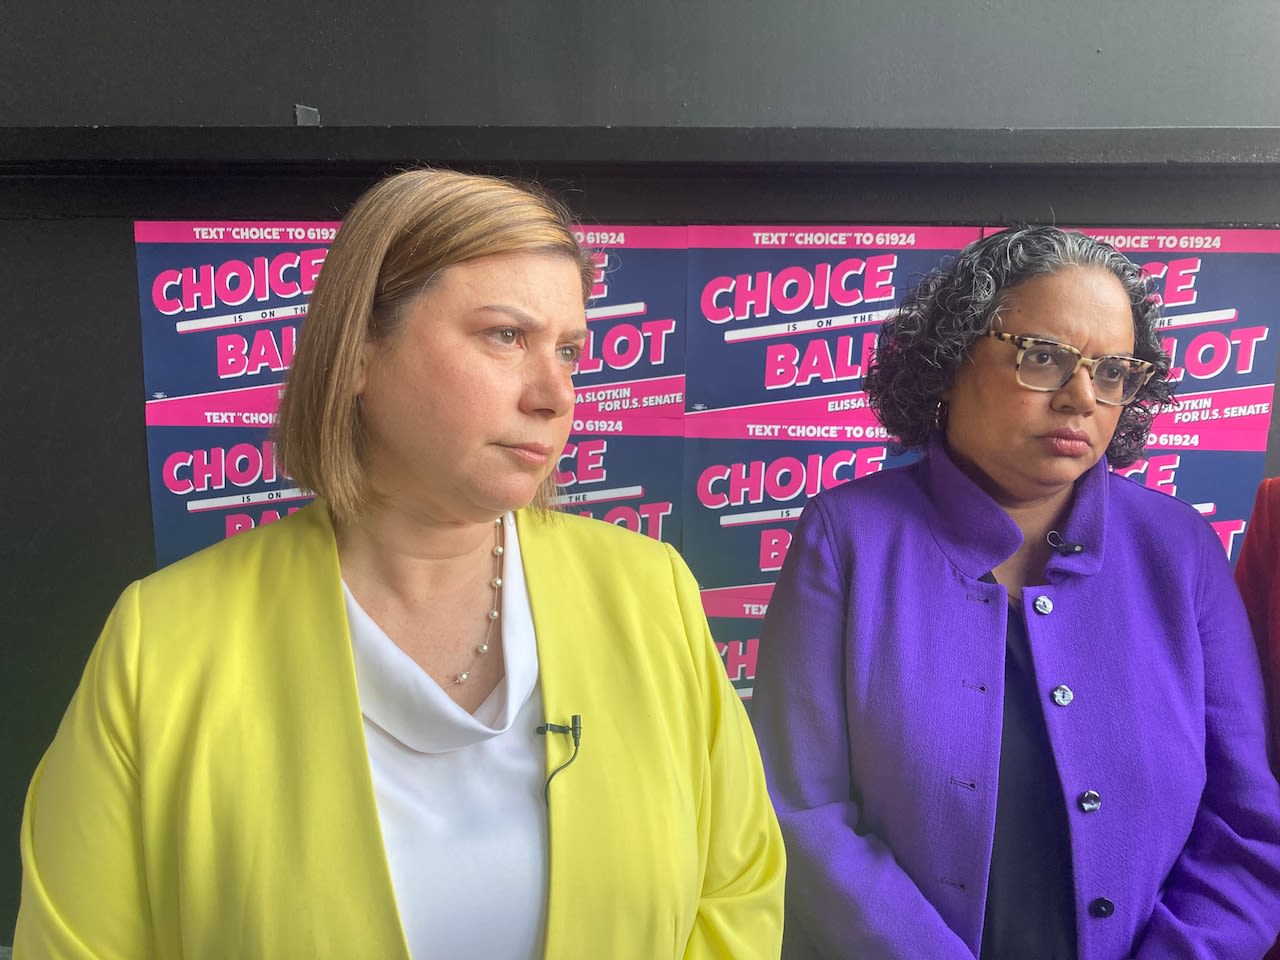 ‘Choice is on the ballot,’ Slotkin says as she campaigns for U.S. Senate in Grand Rapids